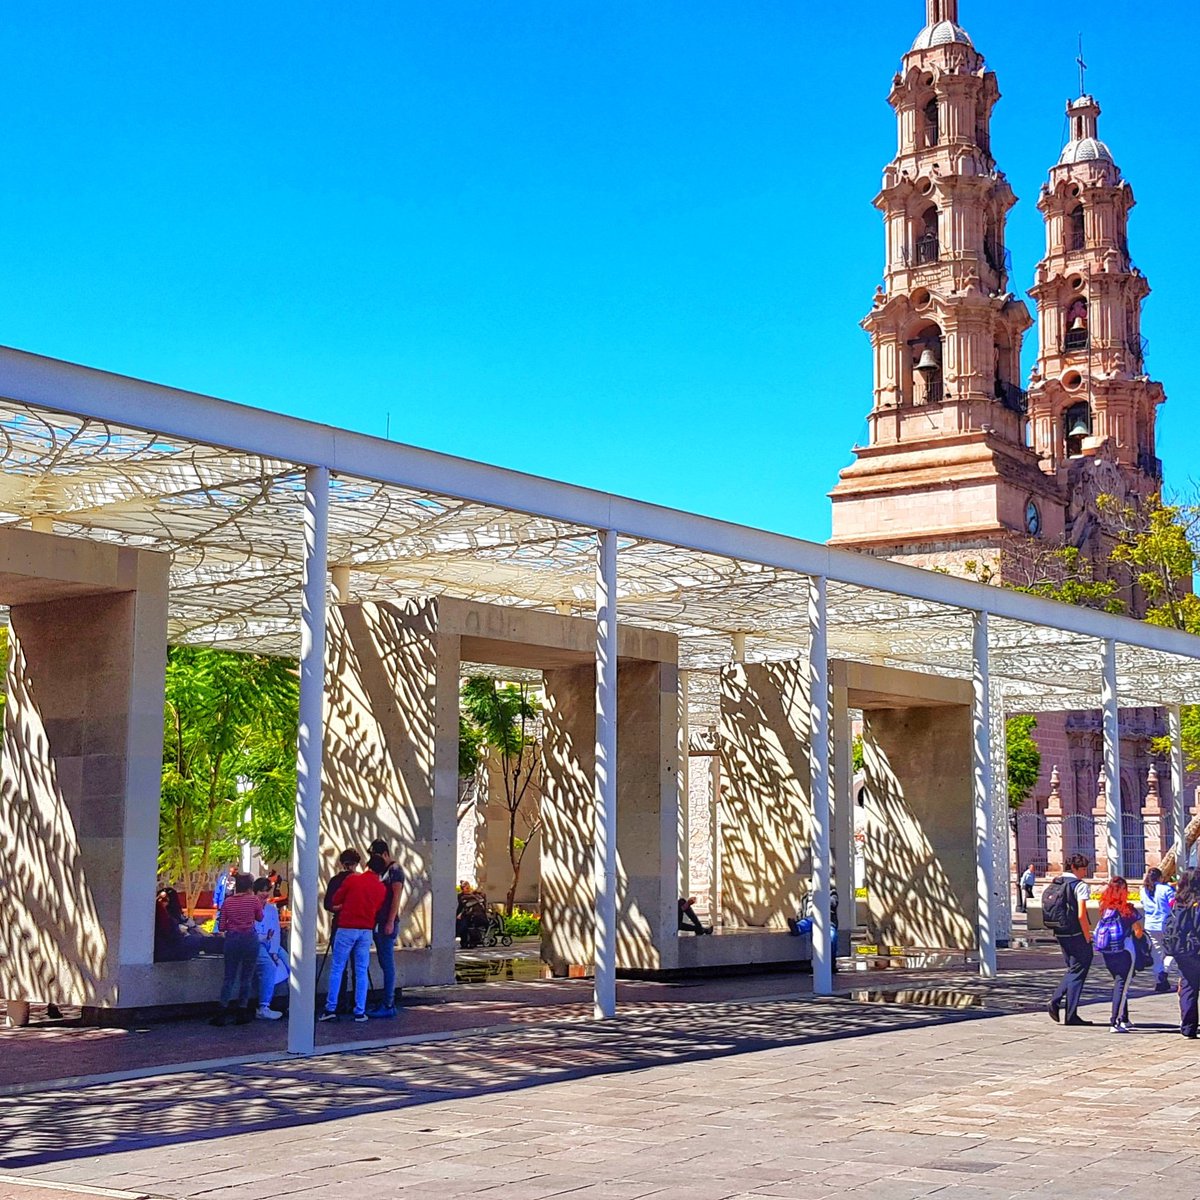 I love the mix of #ModernArchitecture and #ColonialArchitecture of beautiful #Aguascalientes in #Mexico @Estilo_Mex